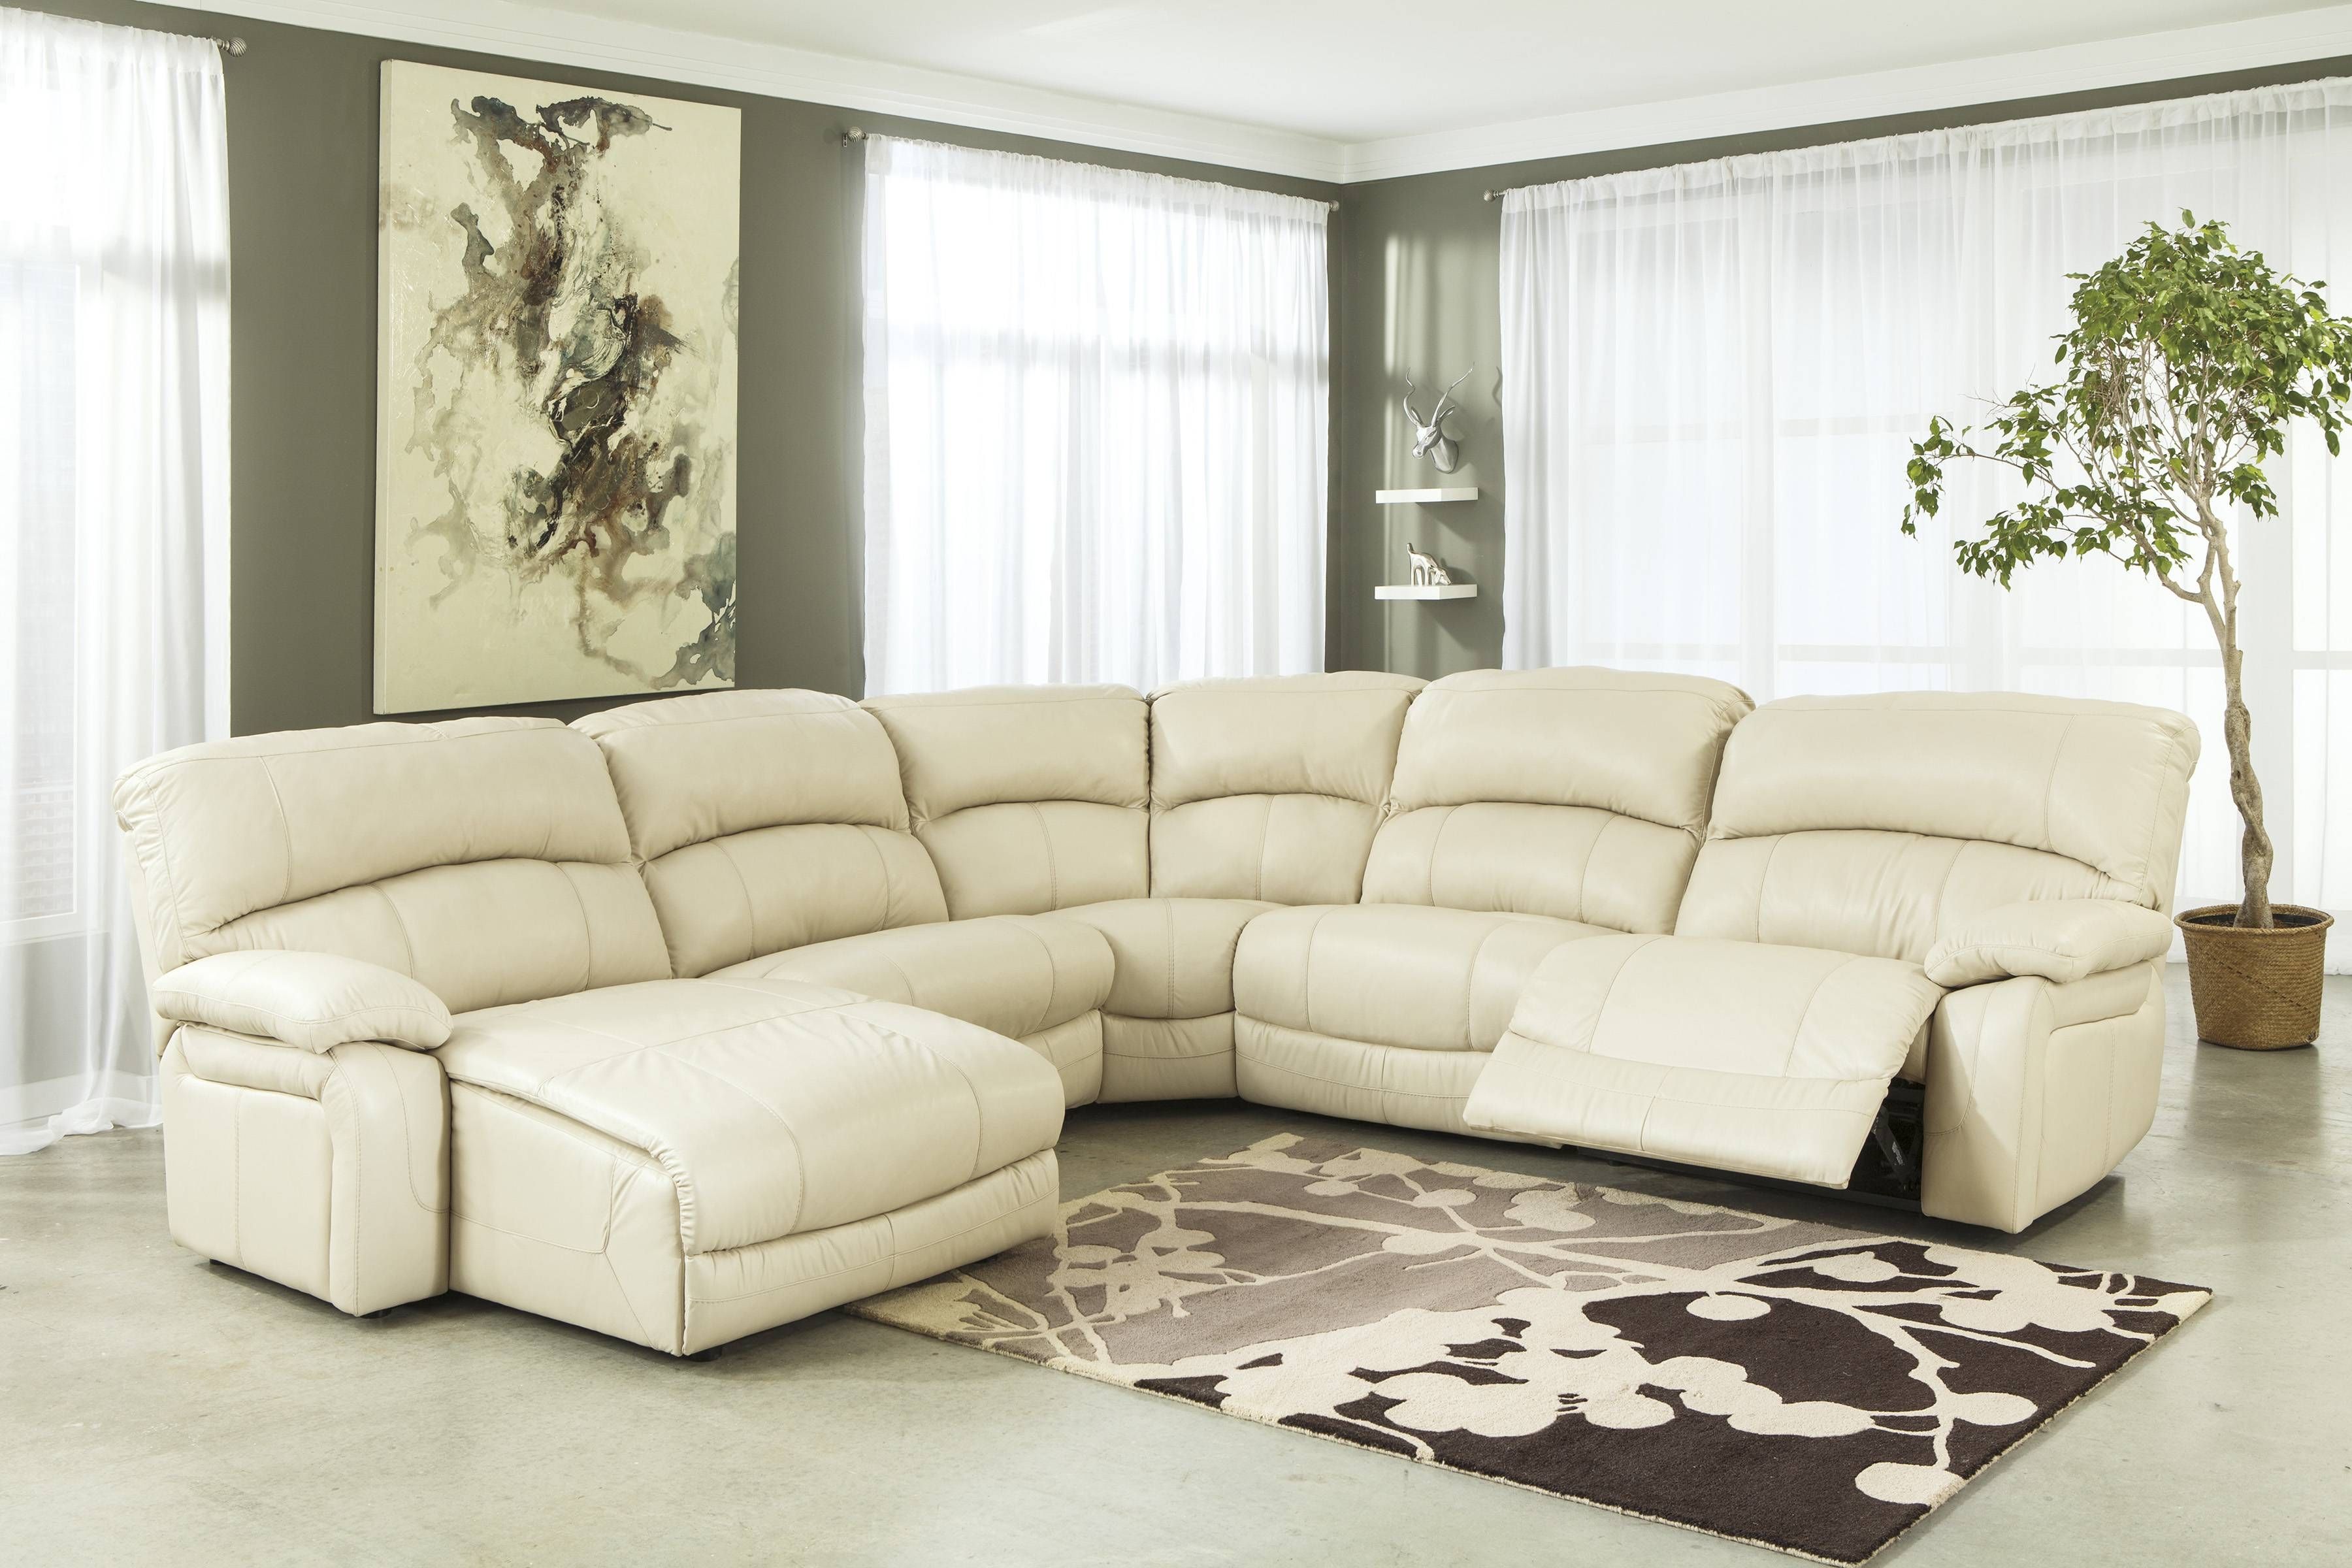 12 Best Cream Sectional Leather Sofas